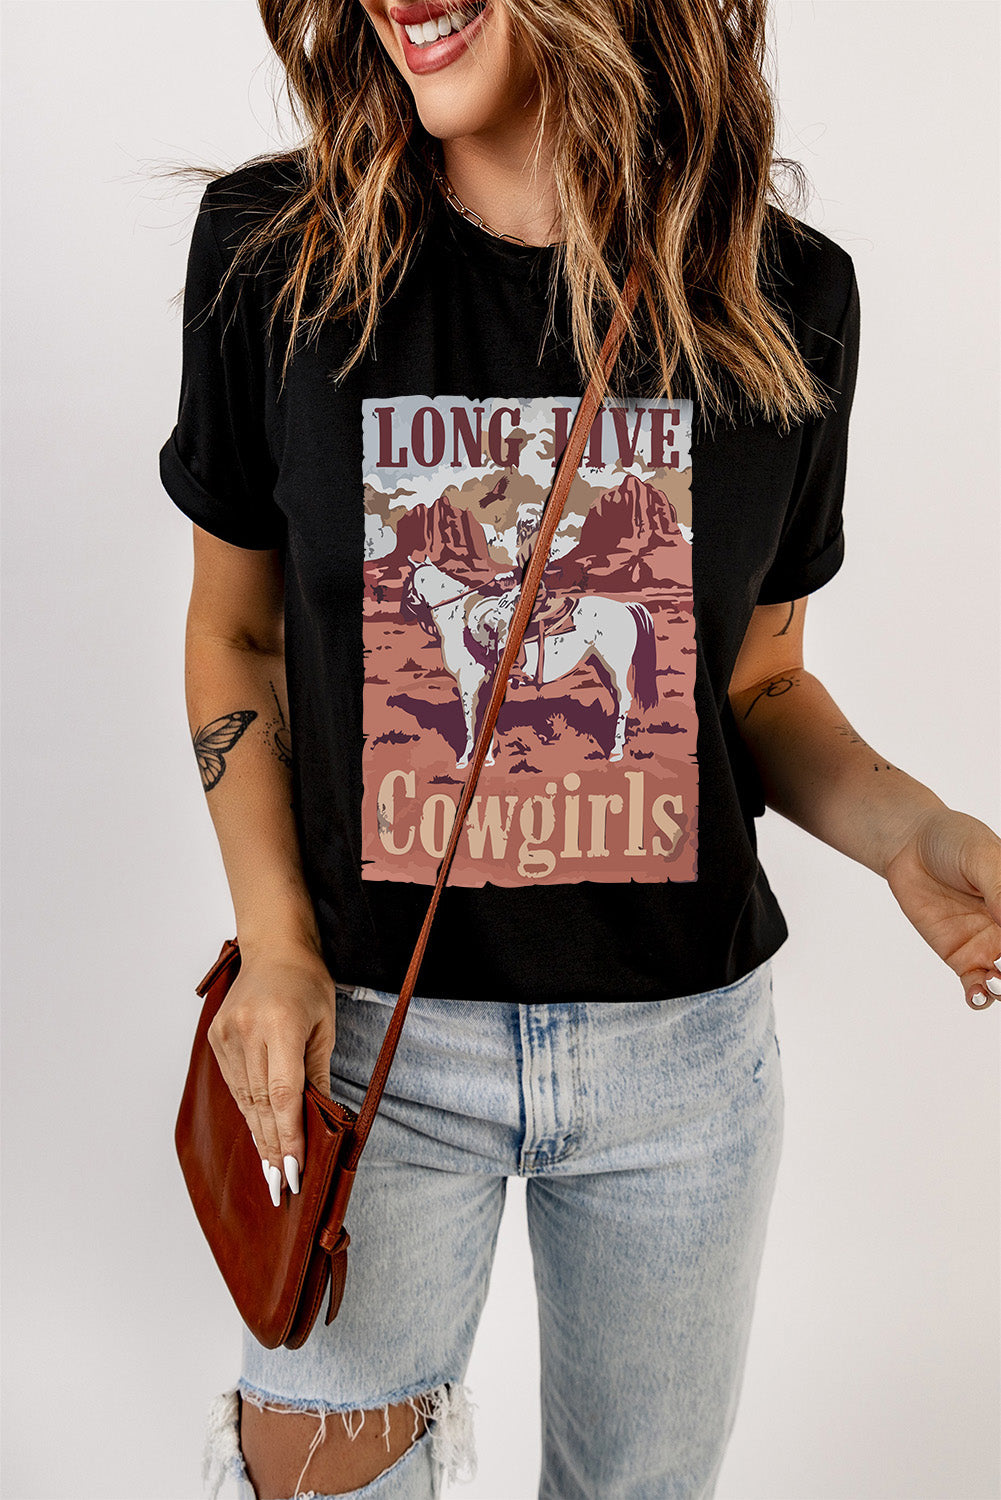 Long Live Cowgirls Vintage T-Shirt - Wildly Max